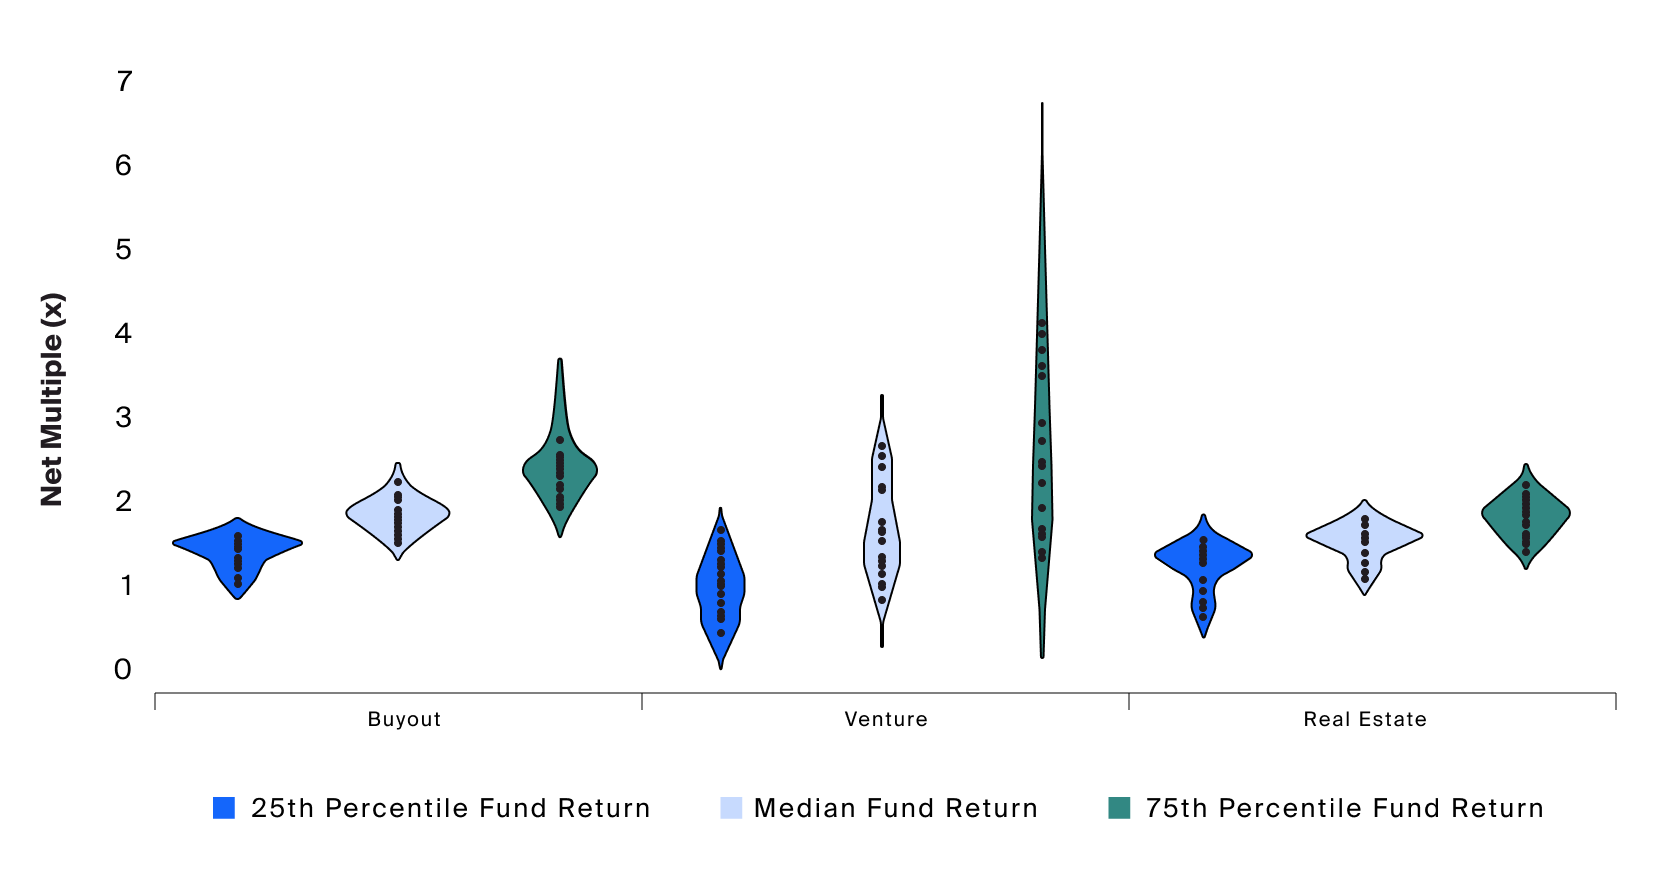 Performance dispersion and frequency of outcomes when combined measured via violin plots, aggregating the peer performance profiles of each strategy